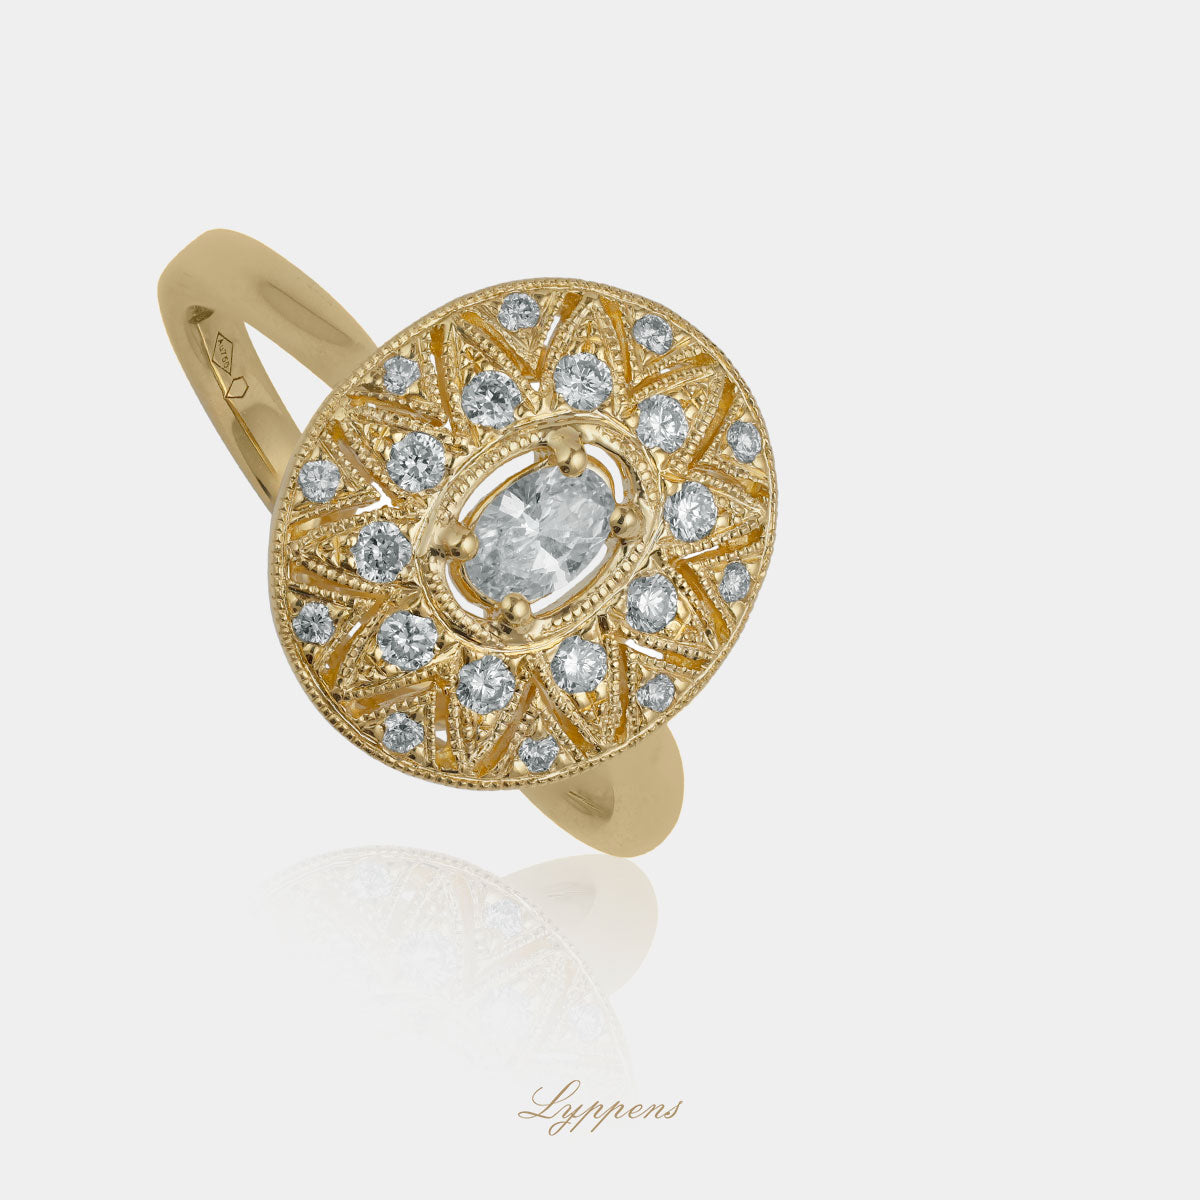 Yellow gold art deco style ring with diamond